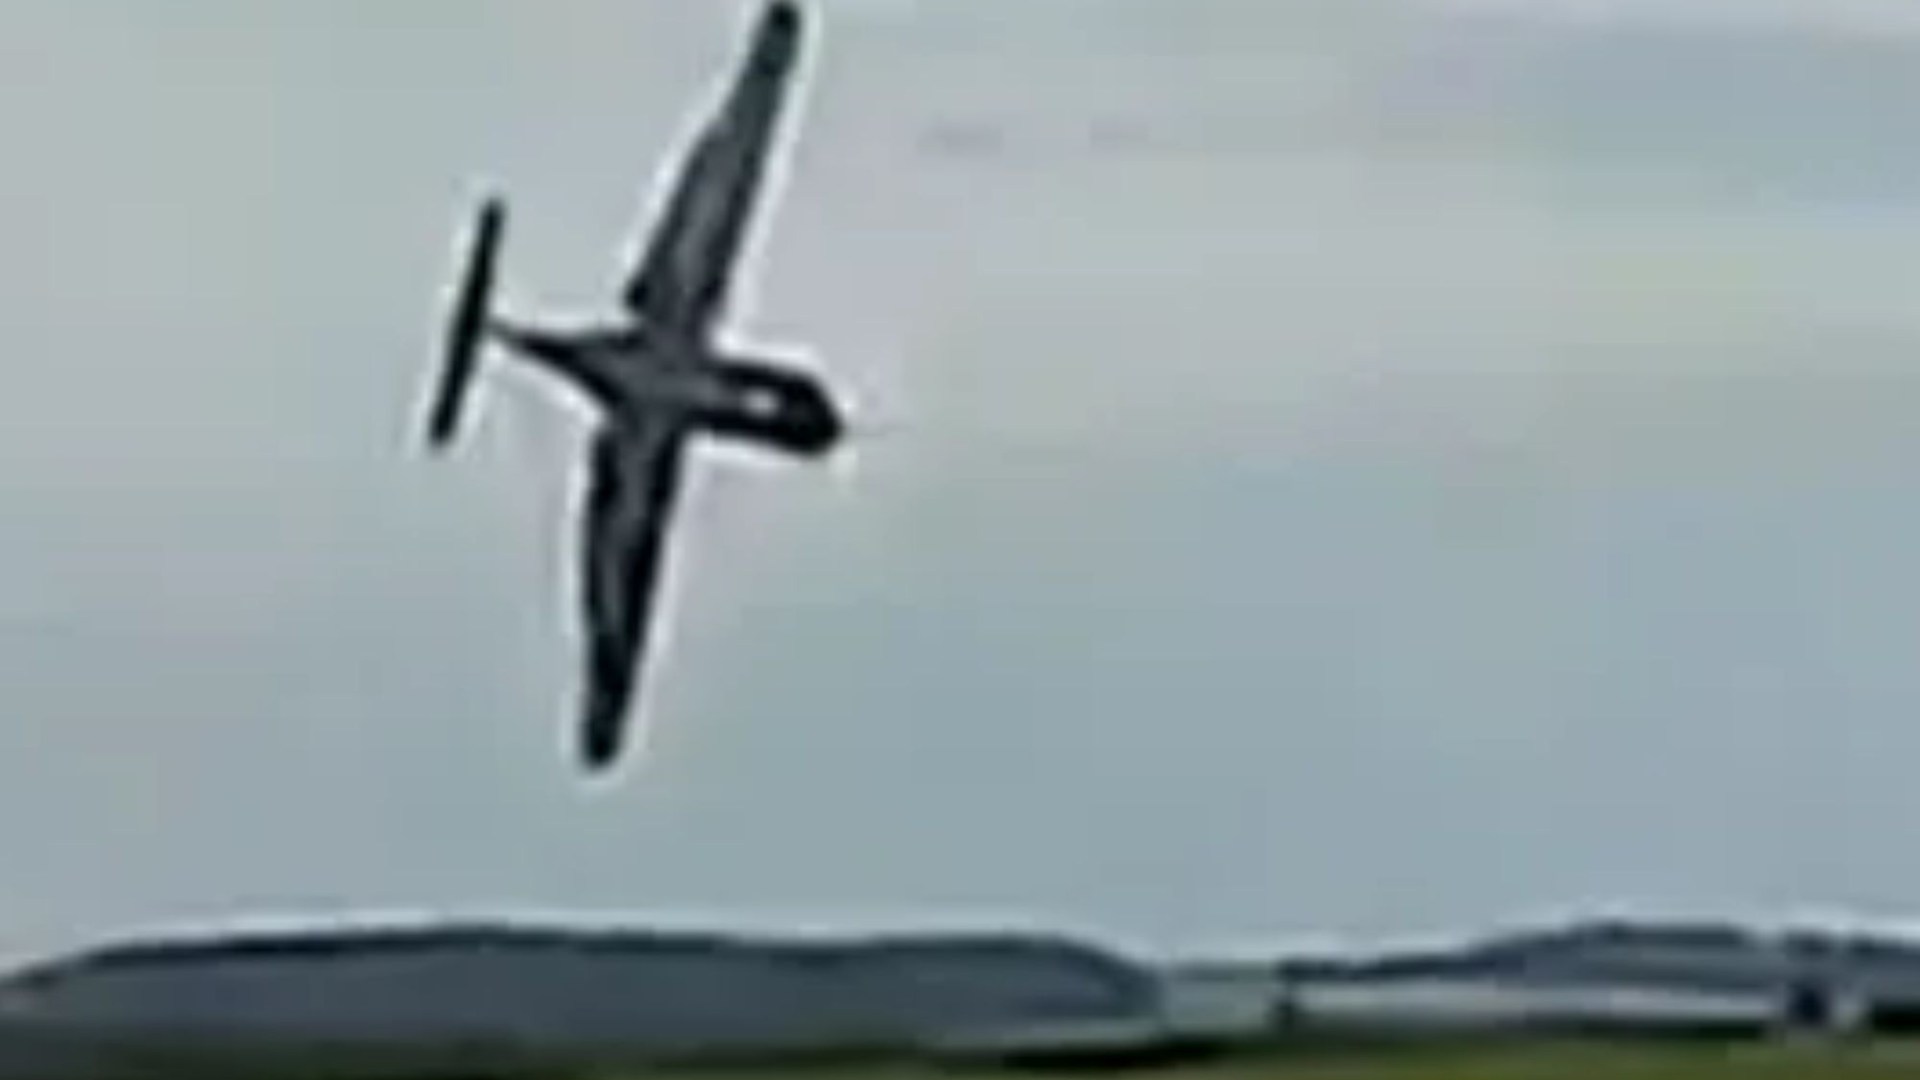 Tragic video shows moments before pilot died in plane crash as visitors looked on at Imperial War Museum airfield